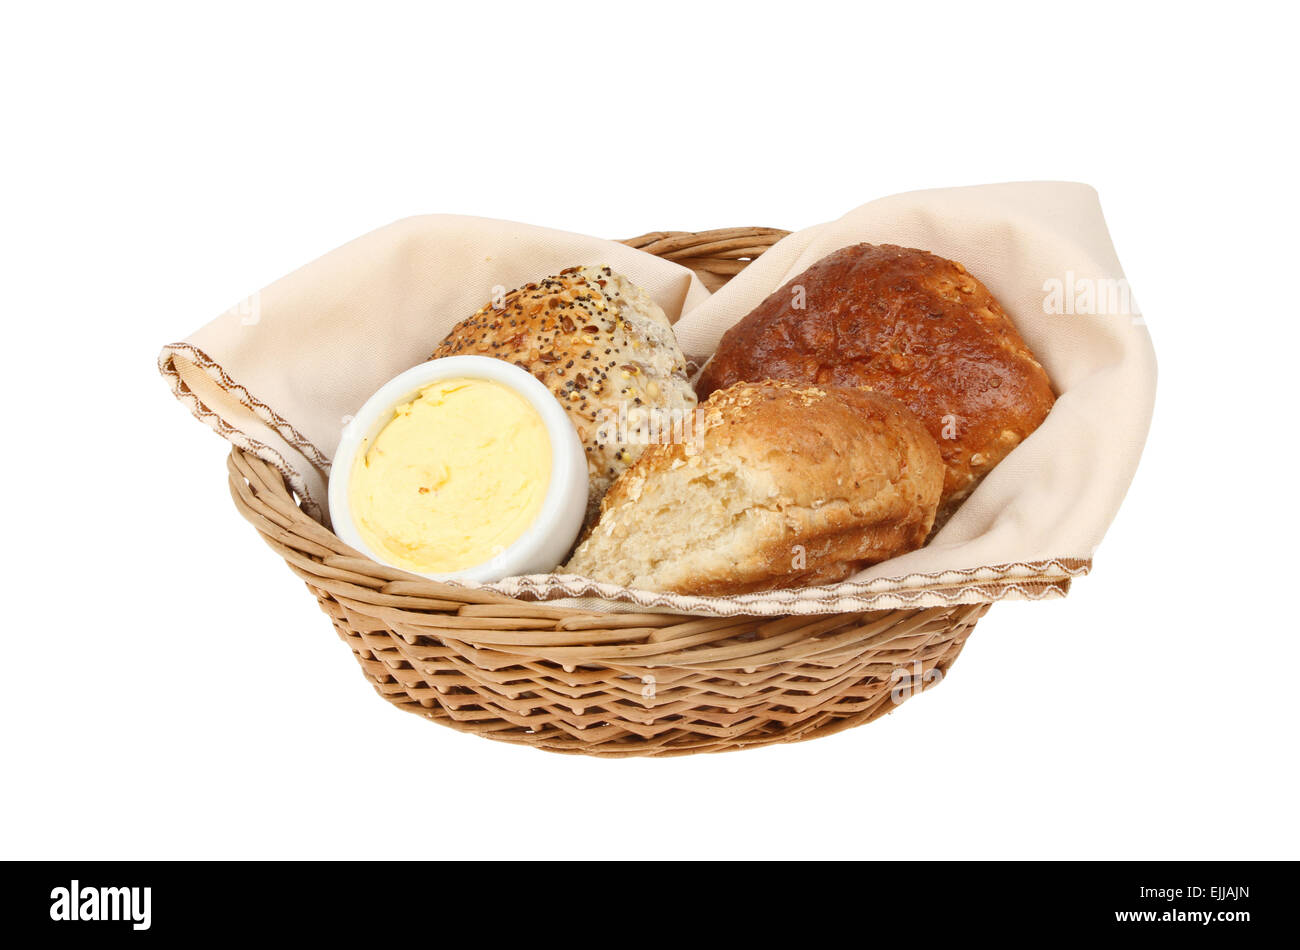 Bread rolls with butter in a wicker basket with a serviette isolated against white Stock Photo